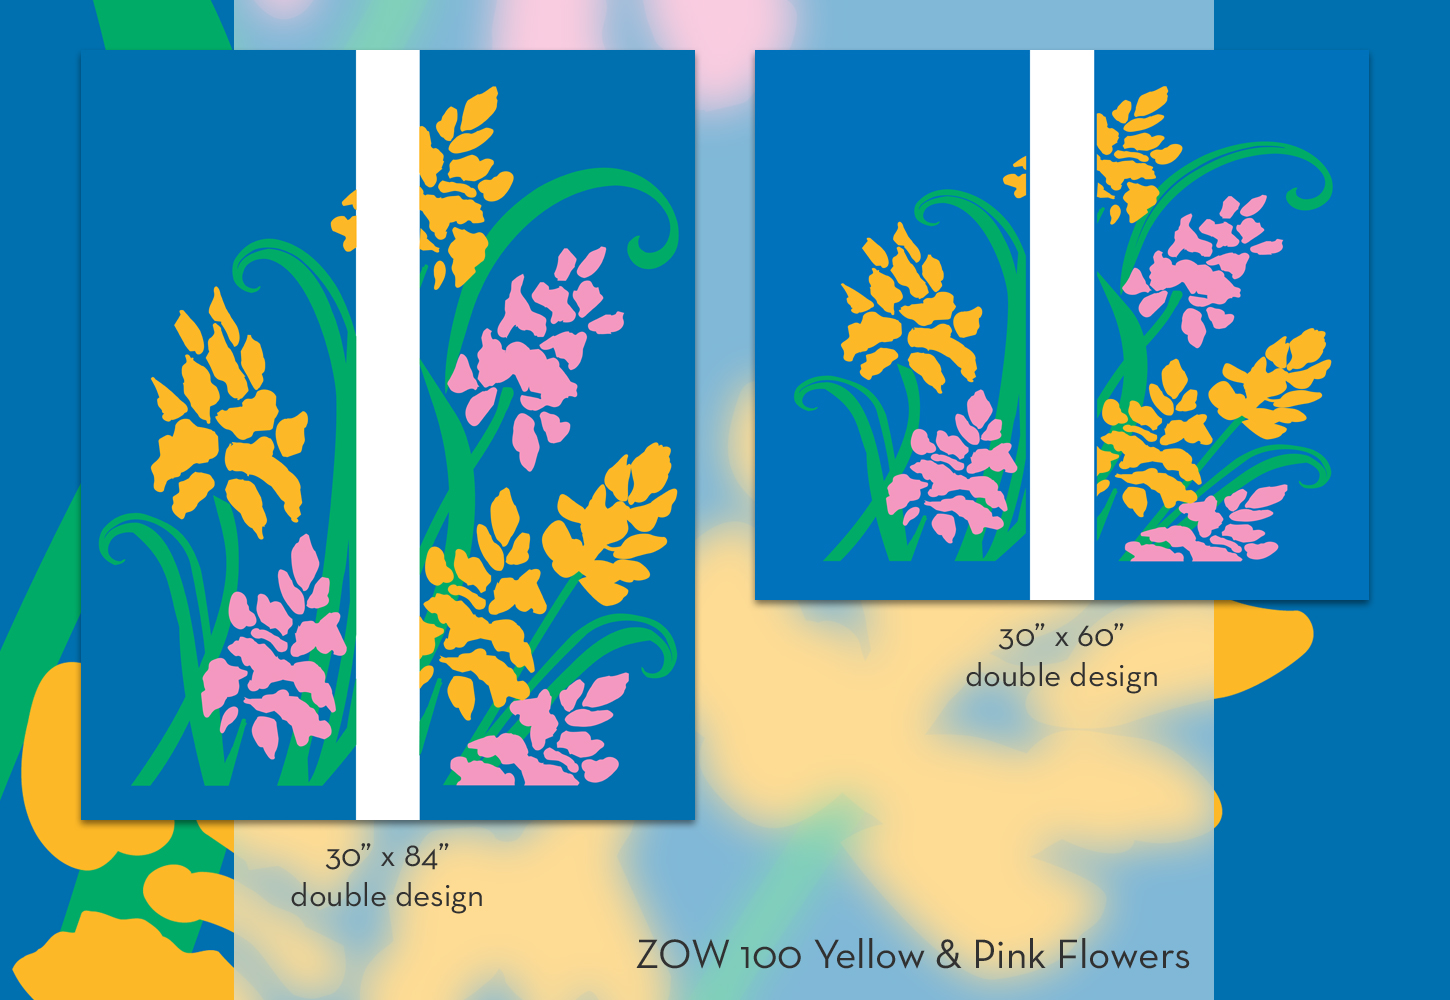 ZOW 100 Yellow & Pink Flowers